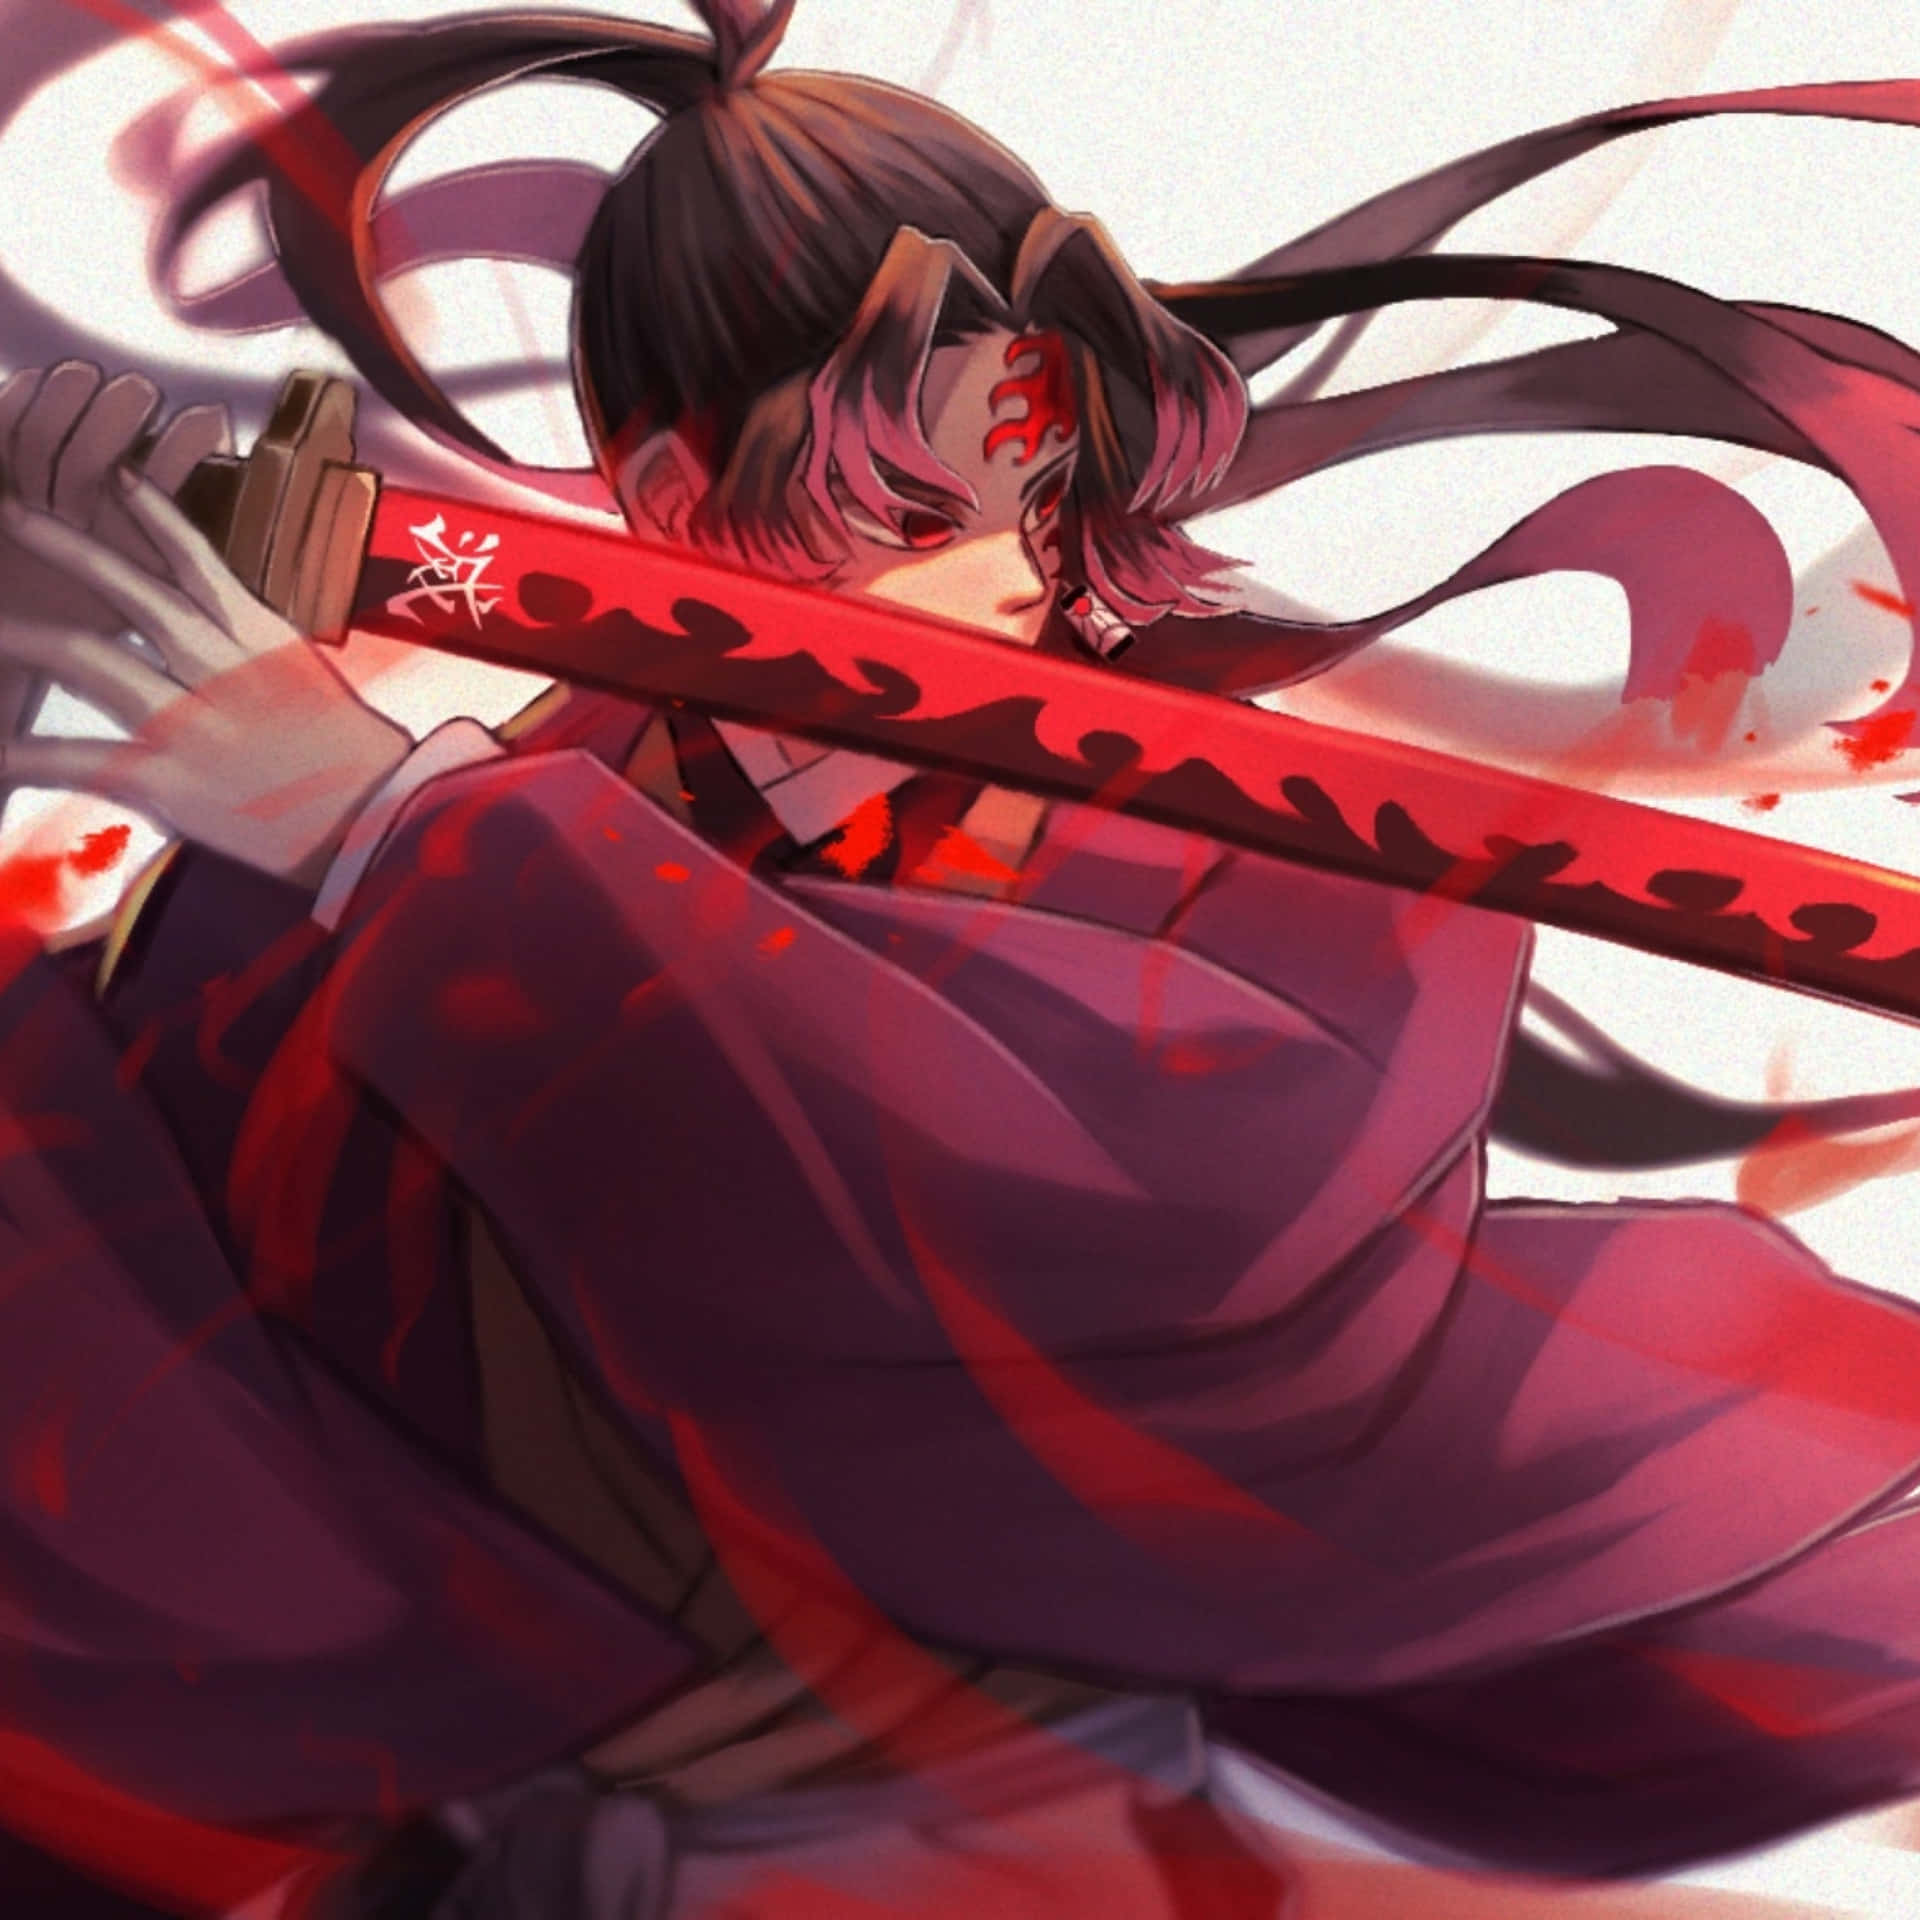 A Girl With A Sword Holding A Red Saber Wallpaper